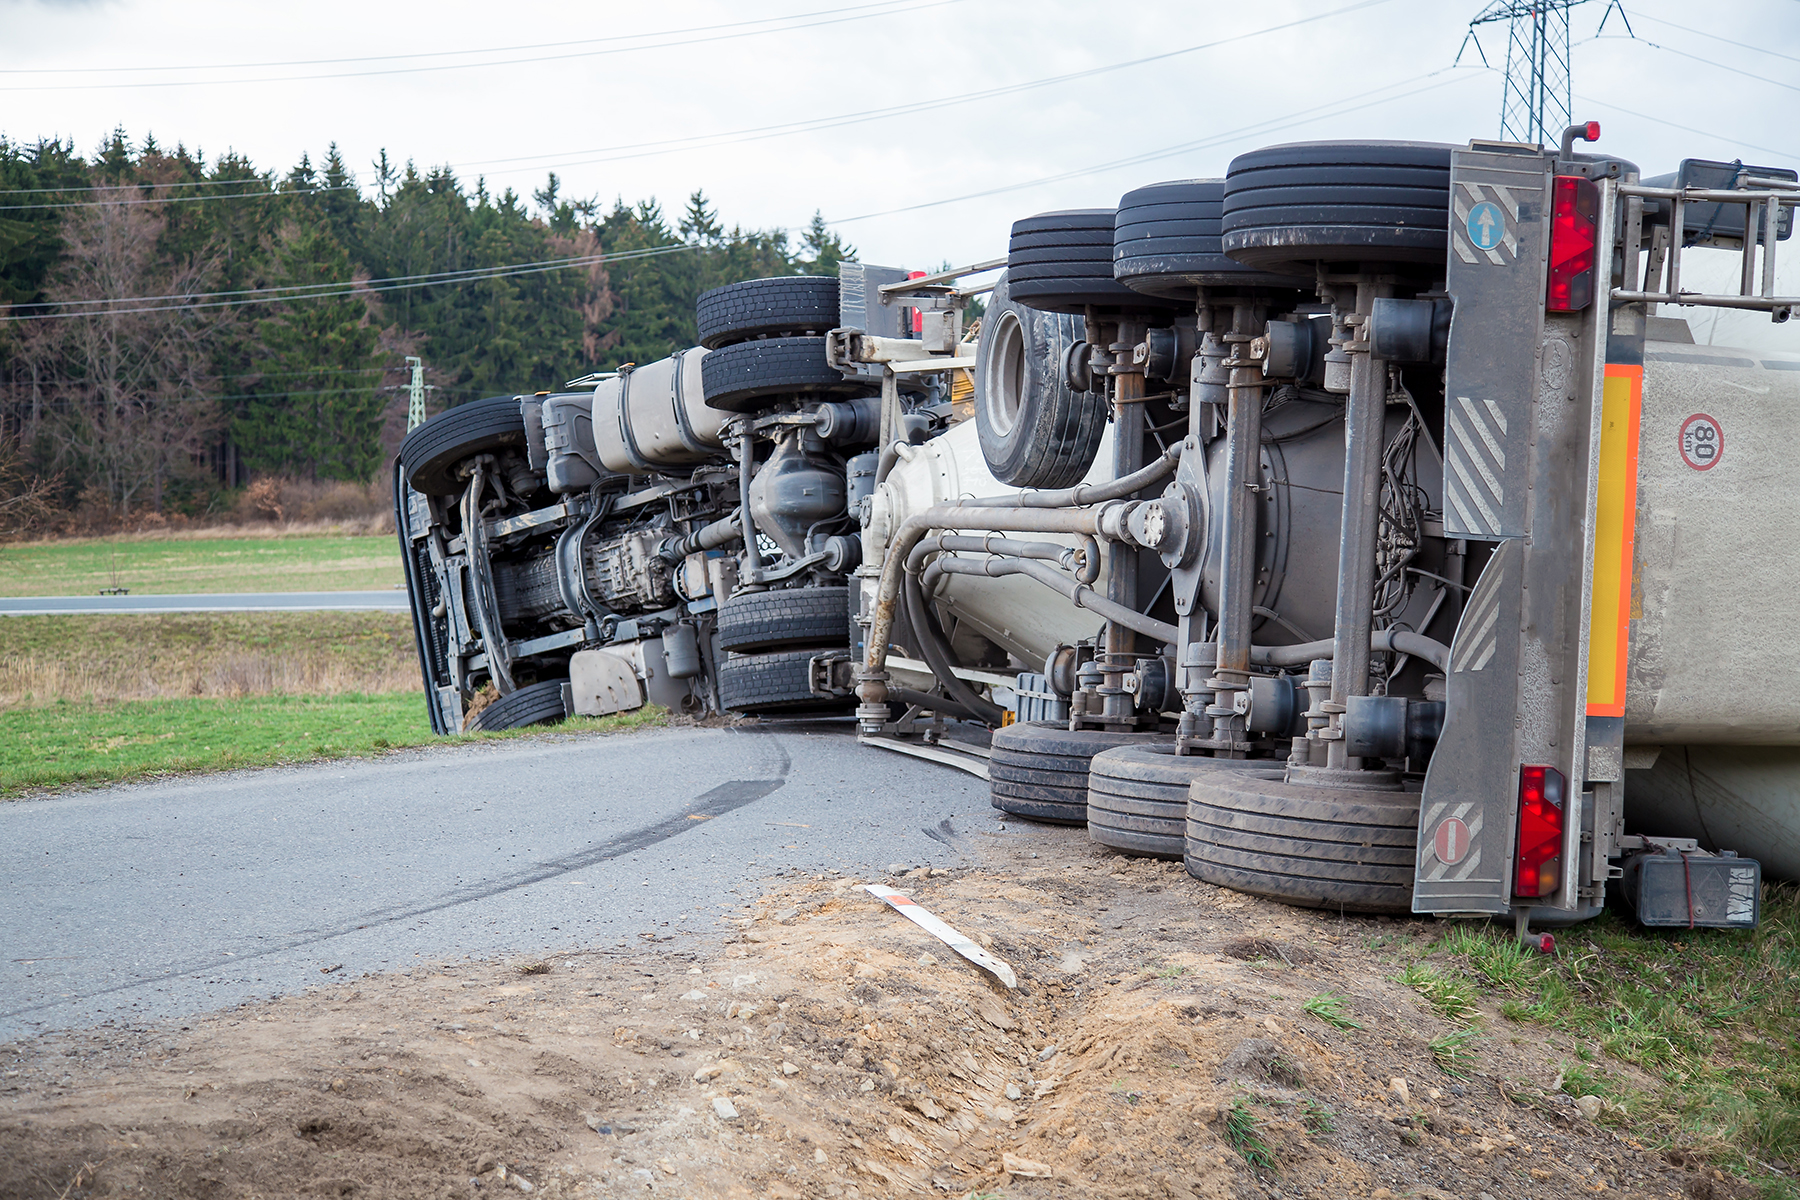 Truck accident. Truck lies on the road after incident.